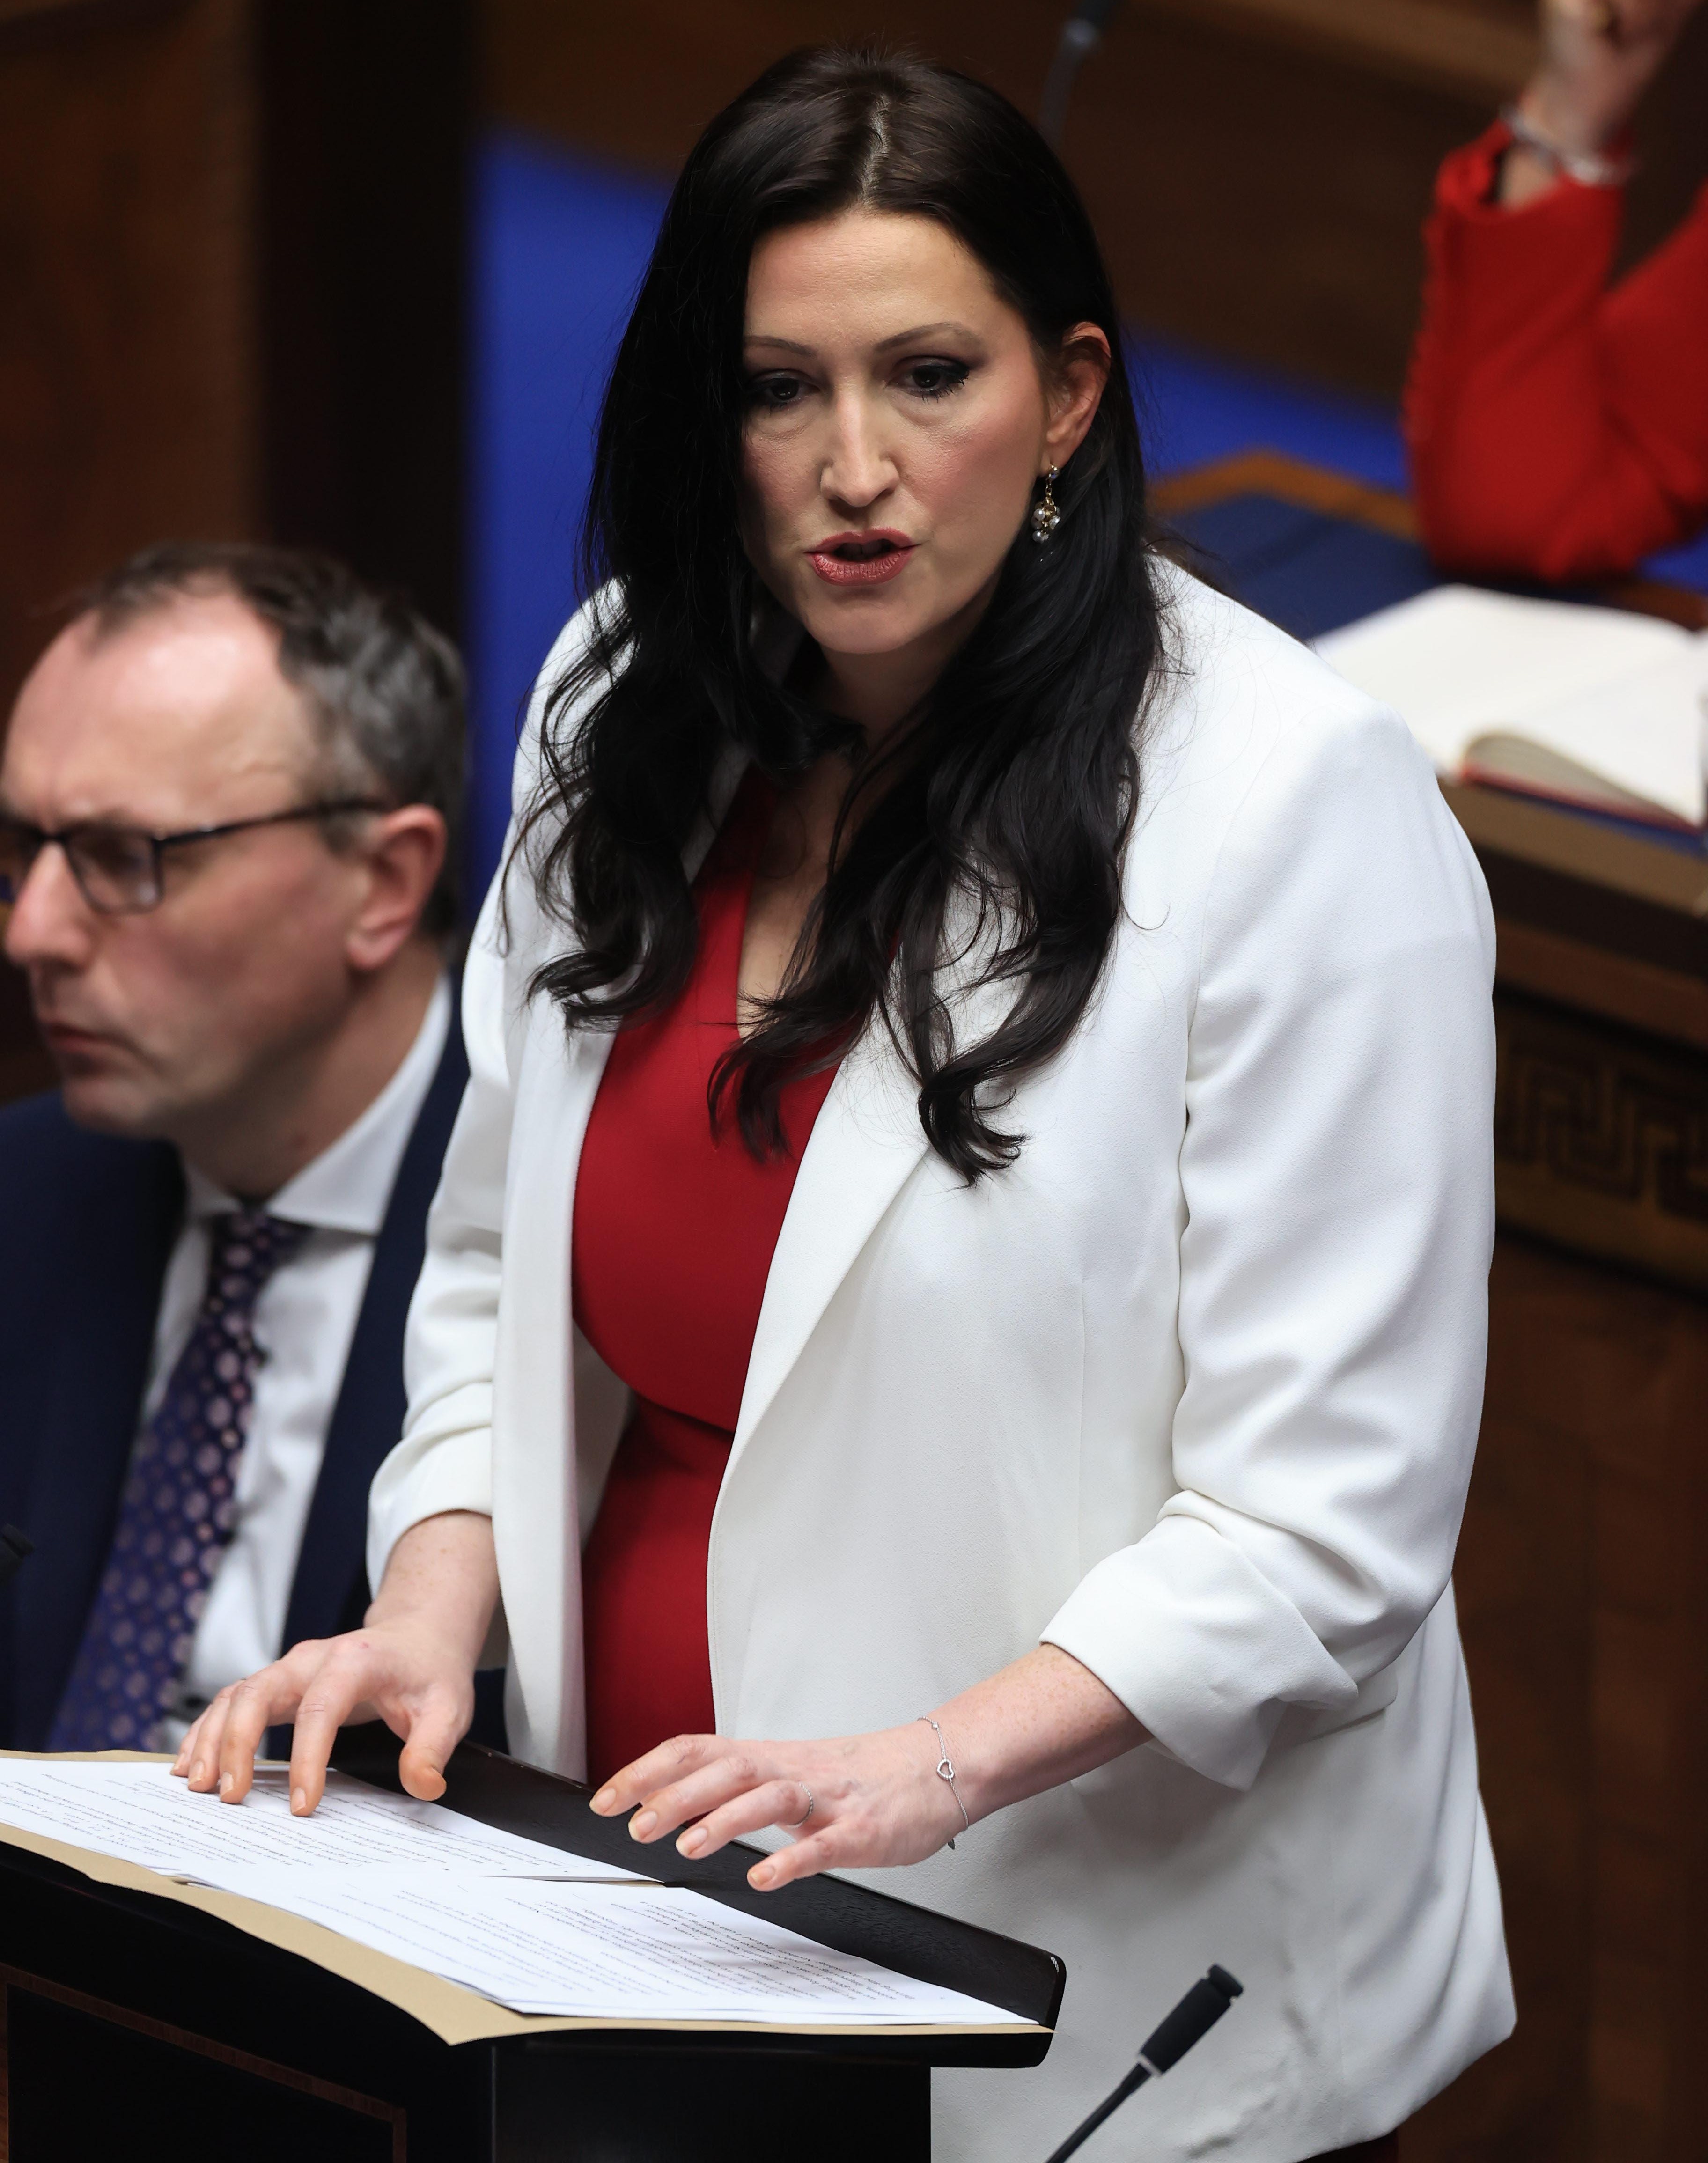 The DUP's Emma Little-Pengelly is the new Deputy First Minister